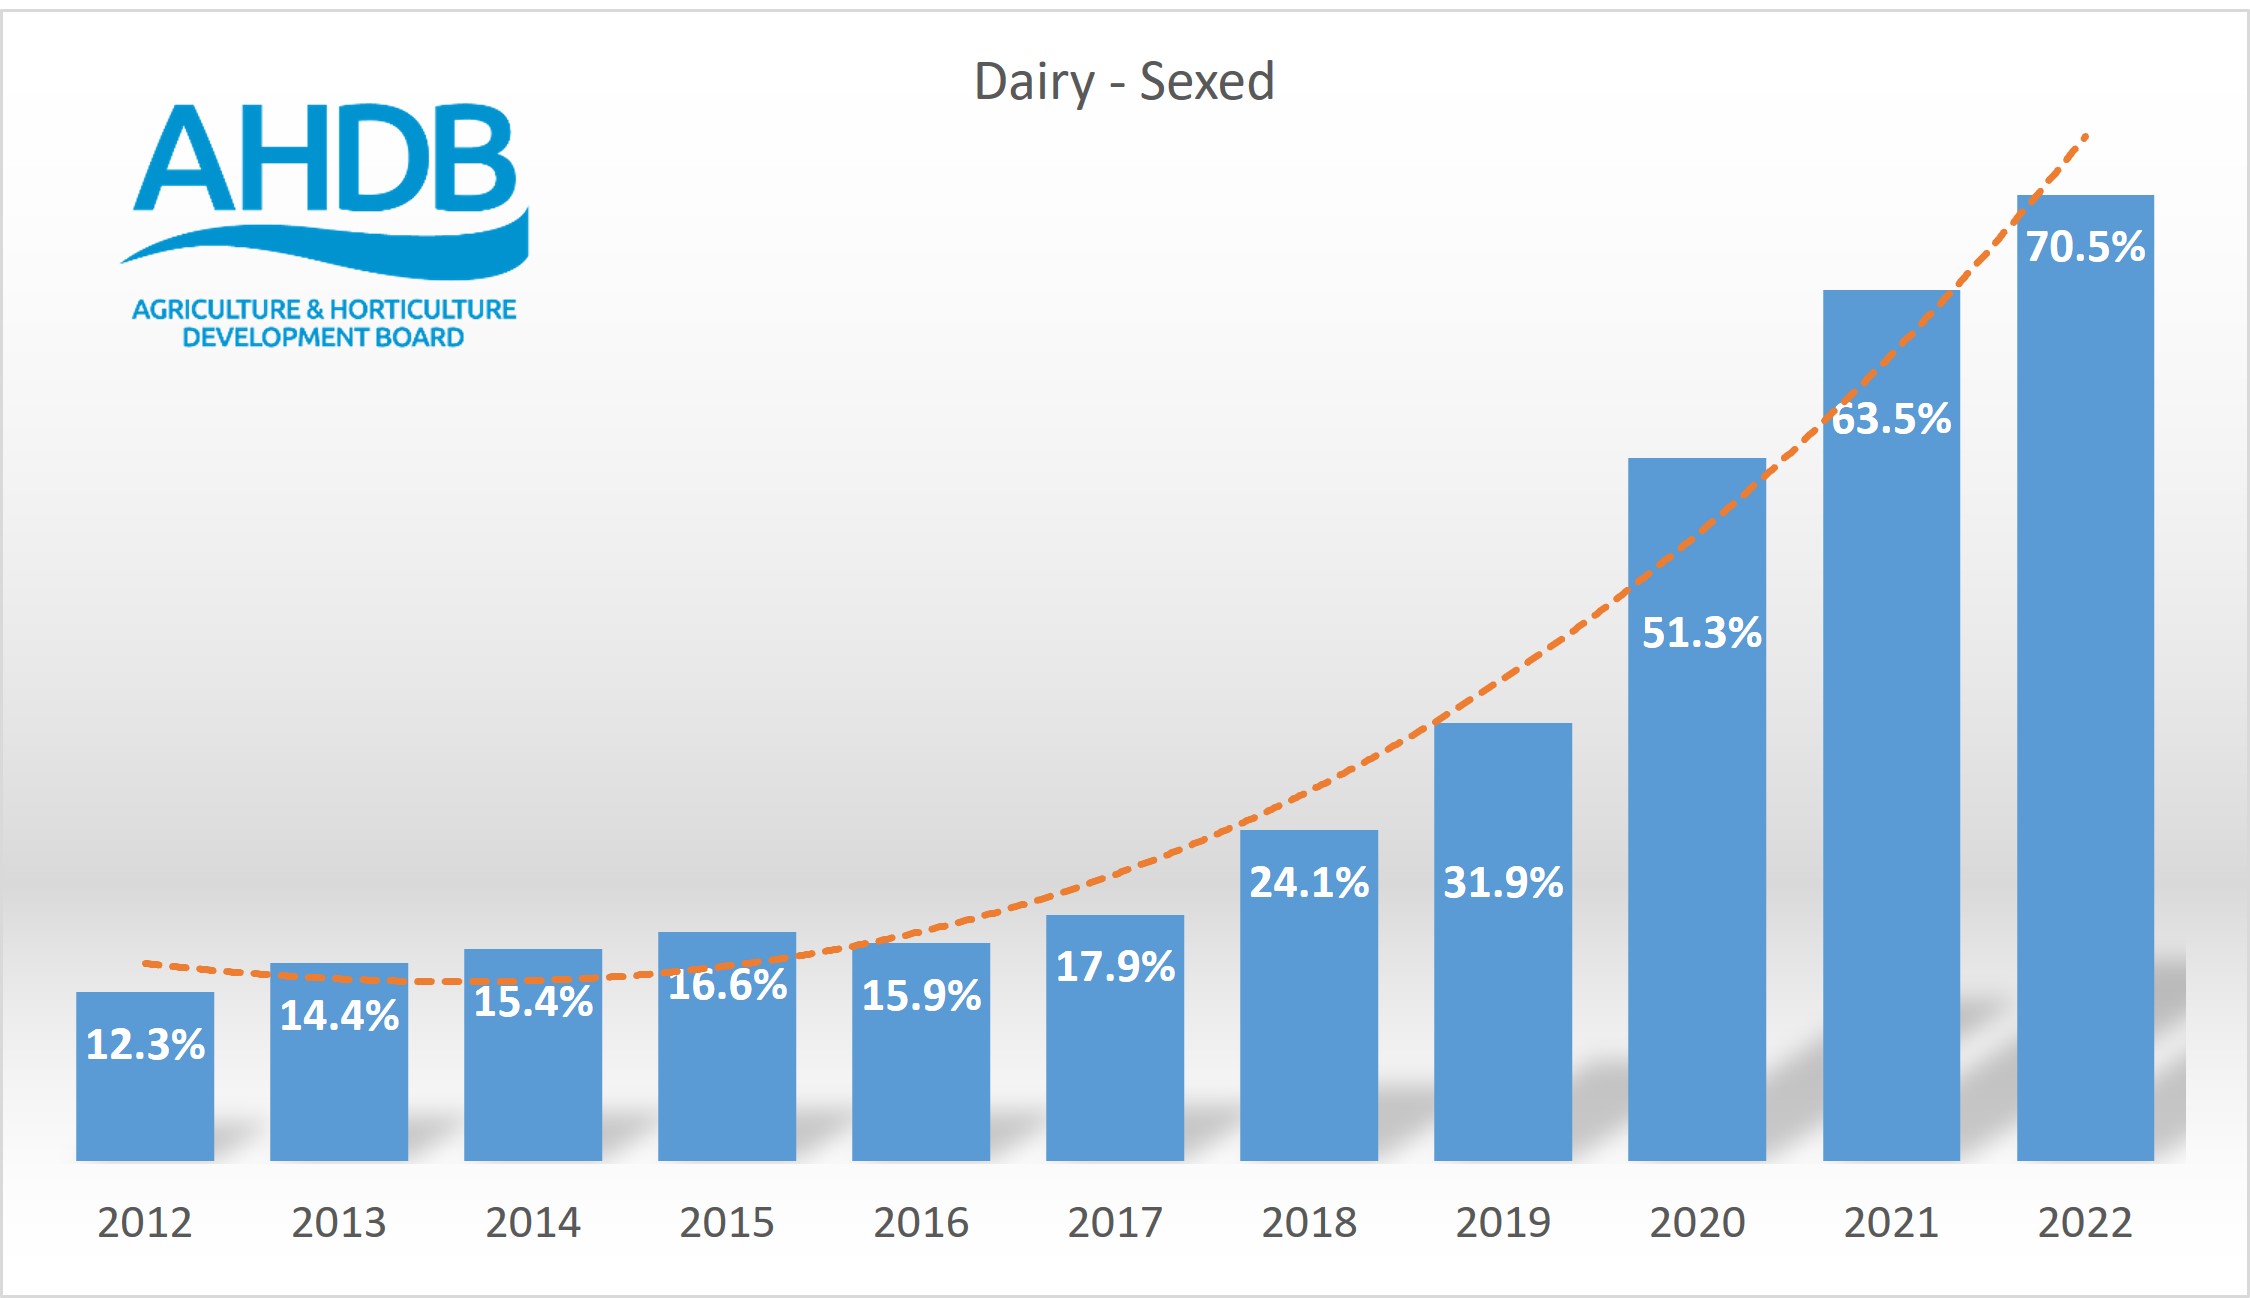 Bar graph showing rise in sales of sexed semen from 12.3% in 2012 to 70.5% in 2022